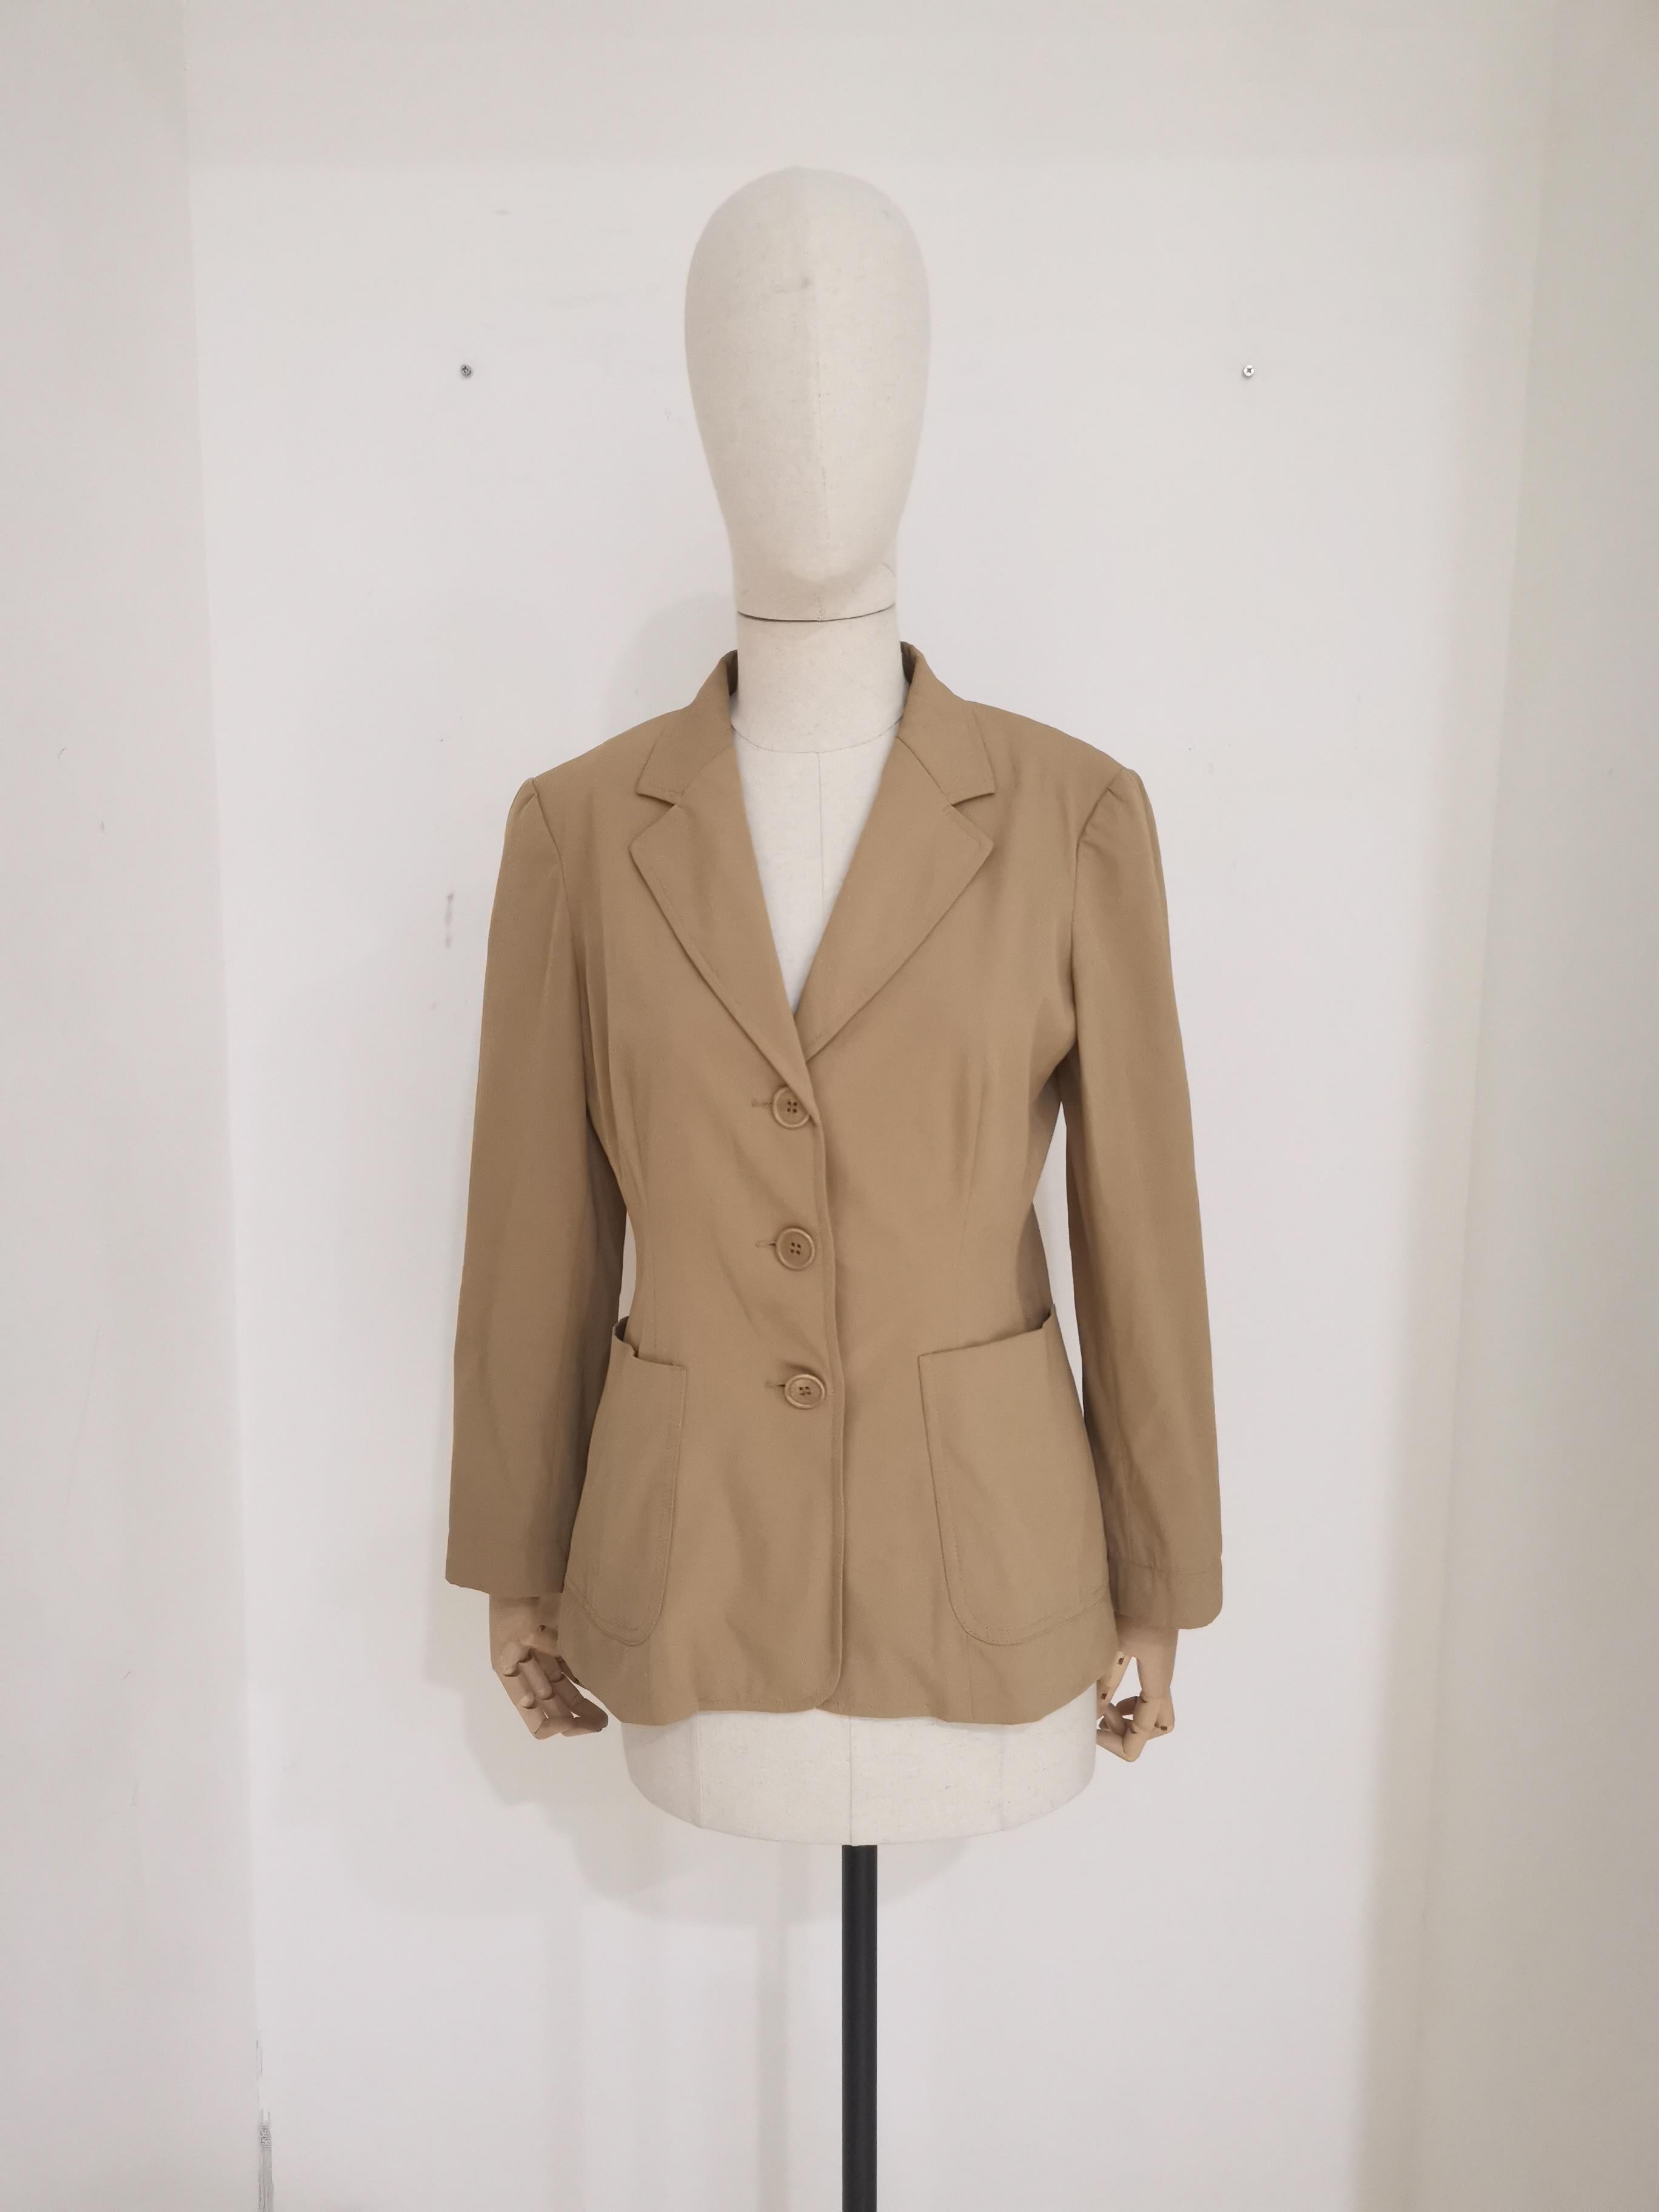 Moschino beige jacket
totally made in italy in size 40